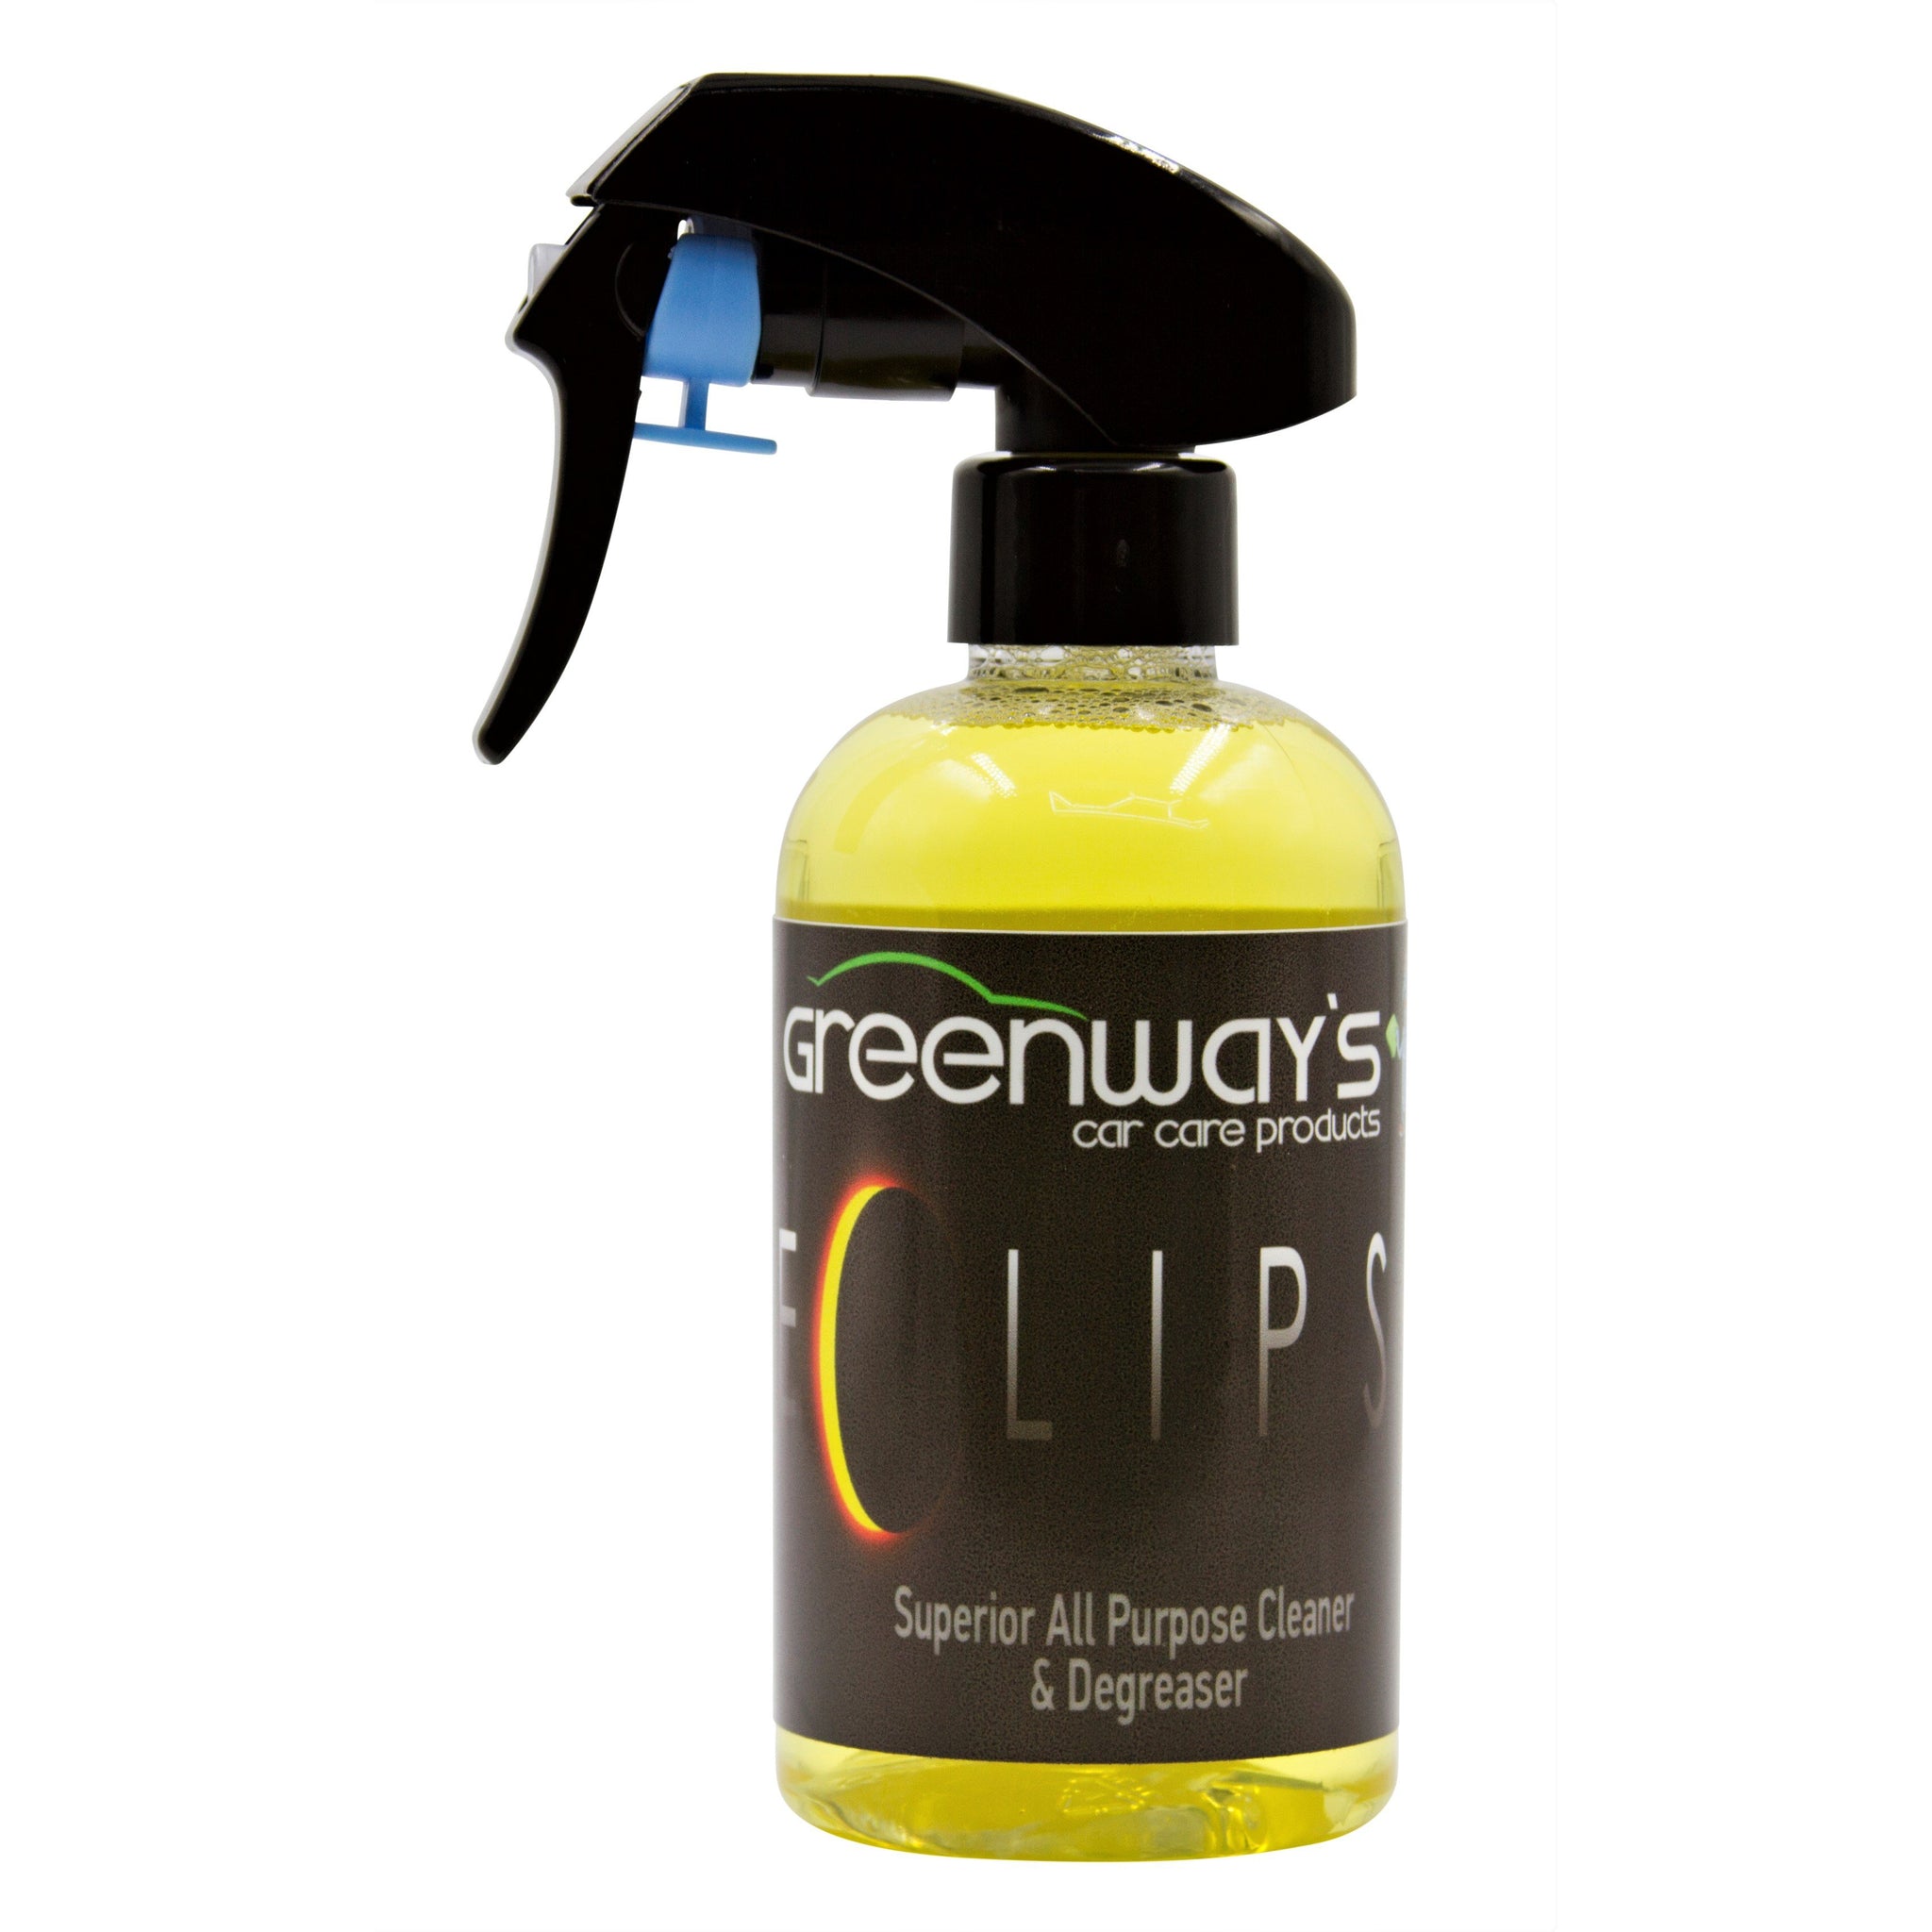 Greenway’s Eclipse, spray and wipe, dual-action all-purpose cleaner, degreaser, free rinsing, optic brighteners, 8 ounces.